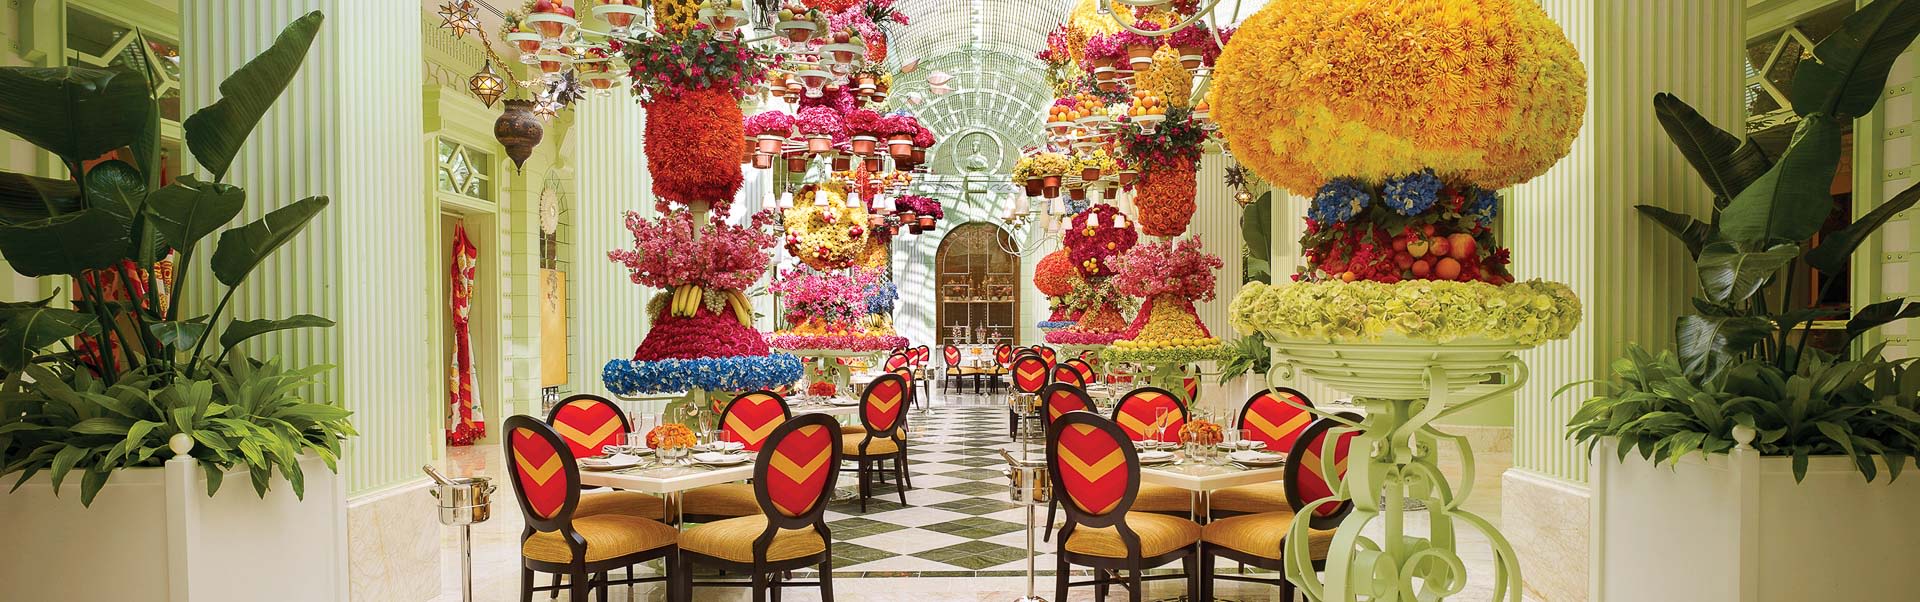 A look inside the Buffet at the Wynn in Las Vegas. Featuring bright colours, stunning floral displays and pristine interior design.